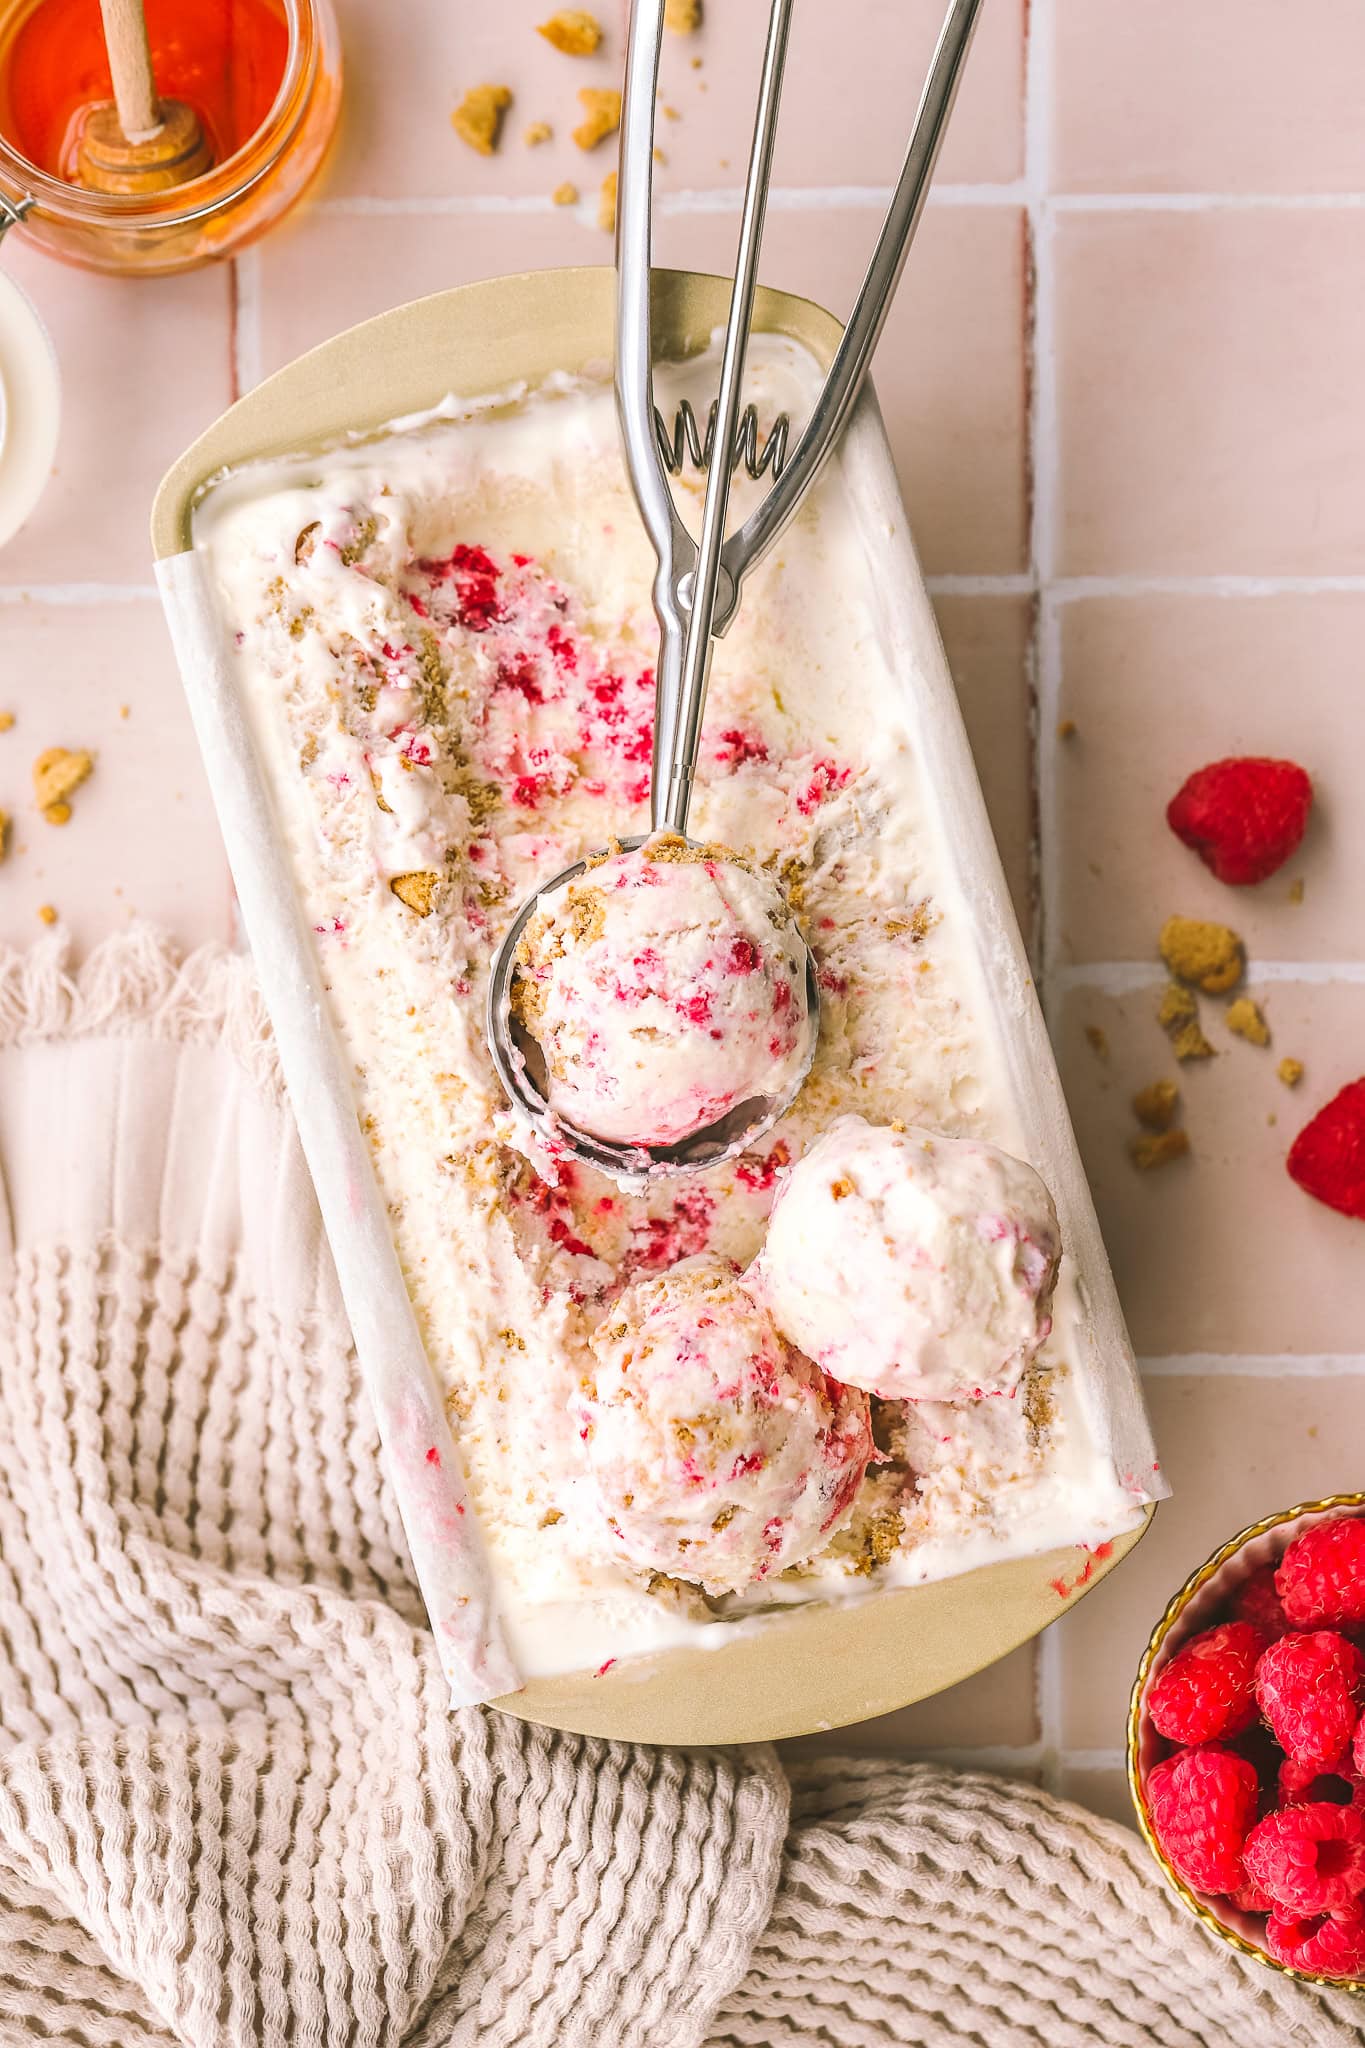 scoops of raspberry ice cream in a loaf pan